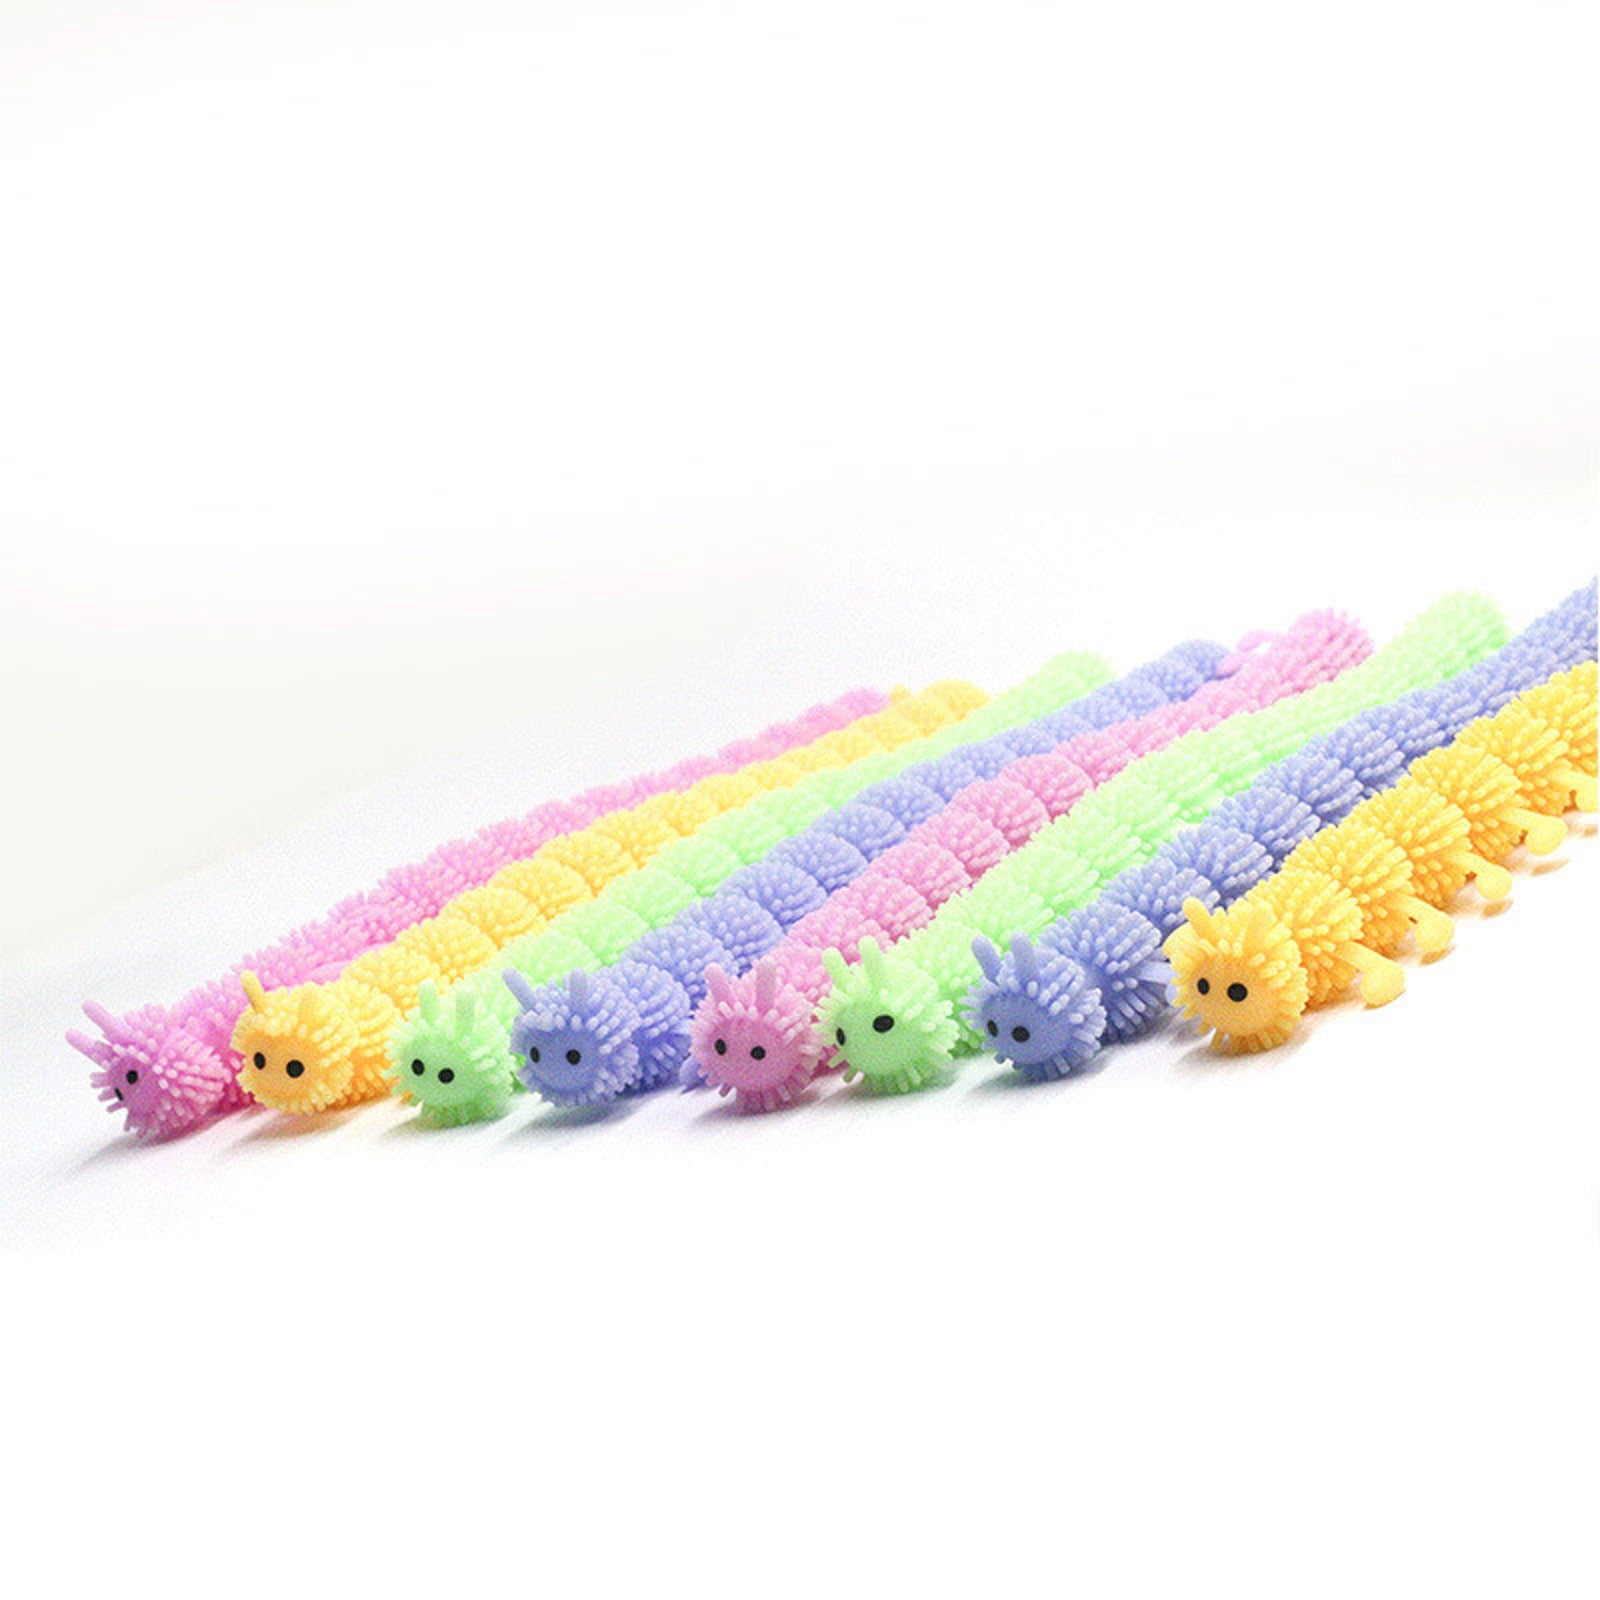  24 Pcs Caterpillar Fidget Worm Stretchy Strings Toy Caterpillar  Worms Fidget Sensory Toy for Kids and Adults with Anxiety Stress, ADD, ADHD  or Autism, Relaxing Toys(9.84 Inch, Worm) : Toys 